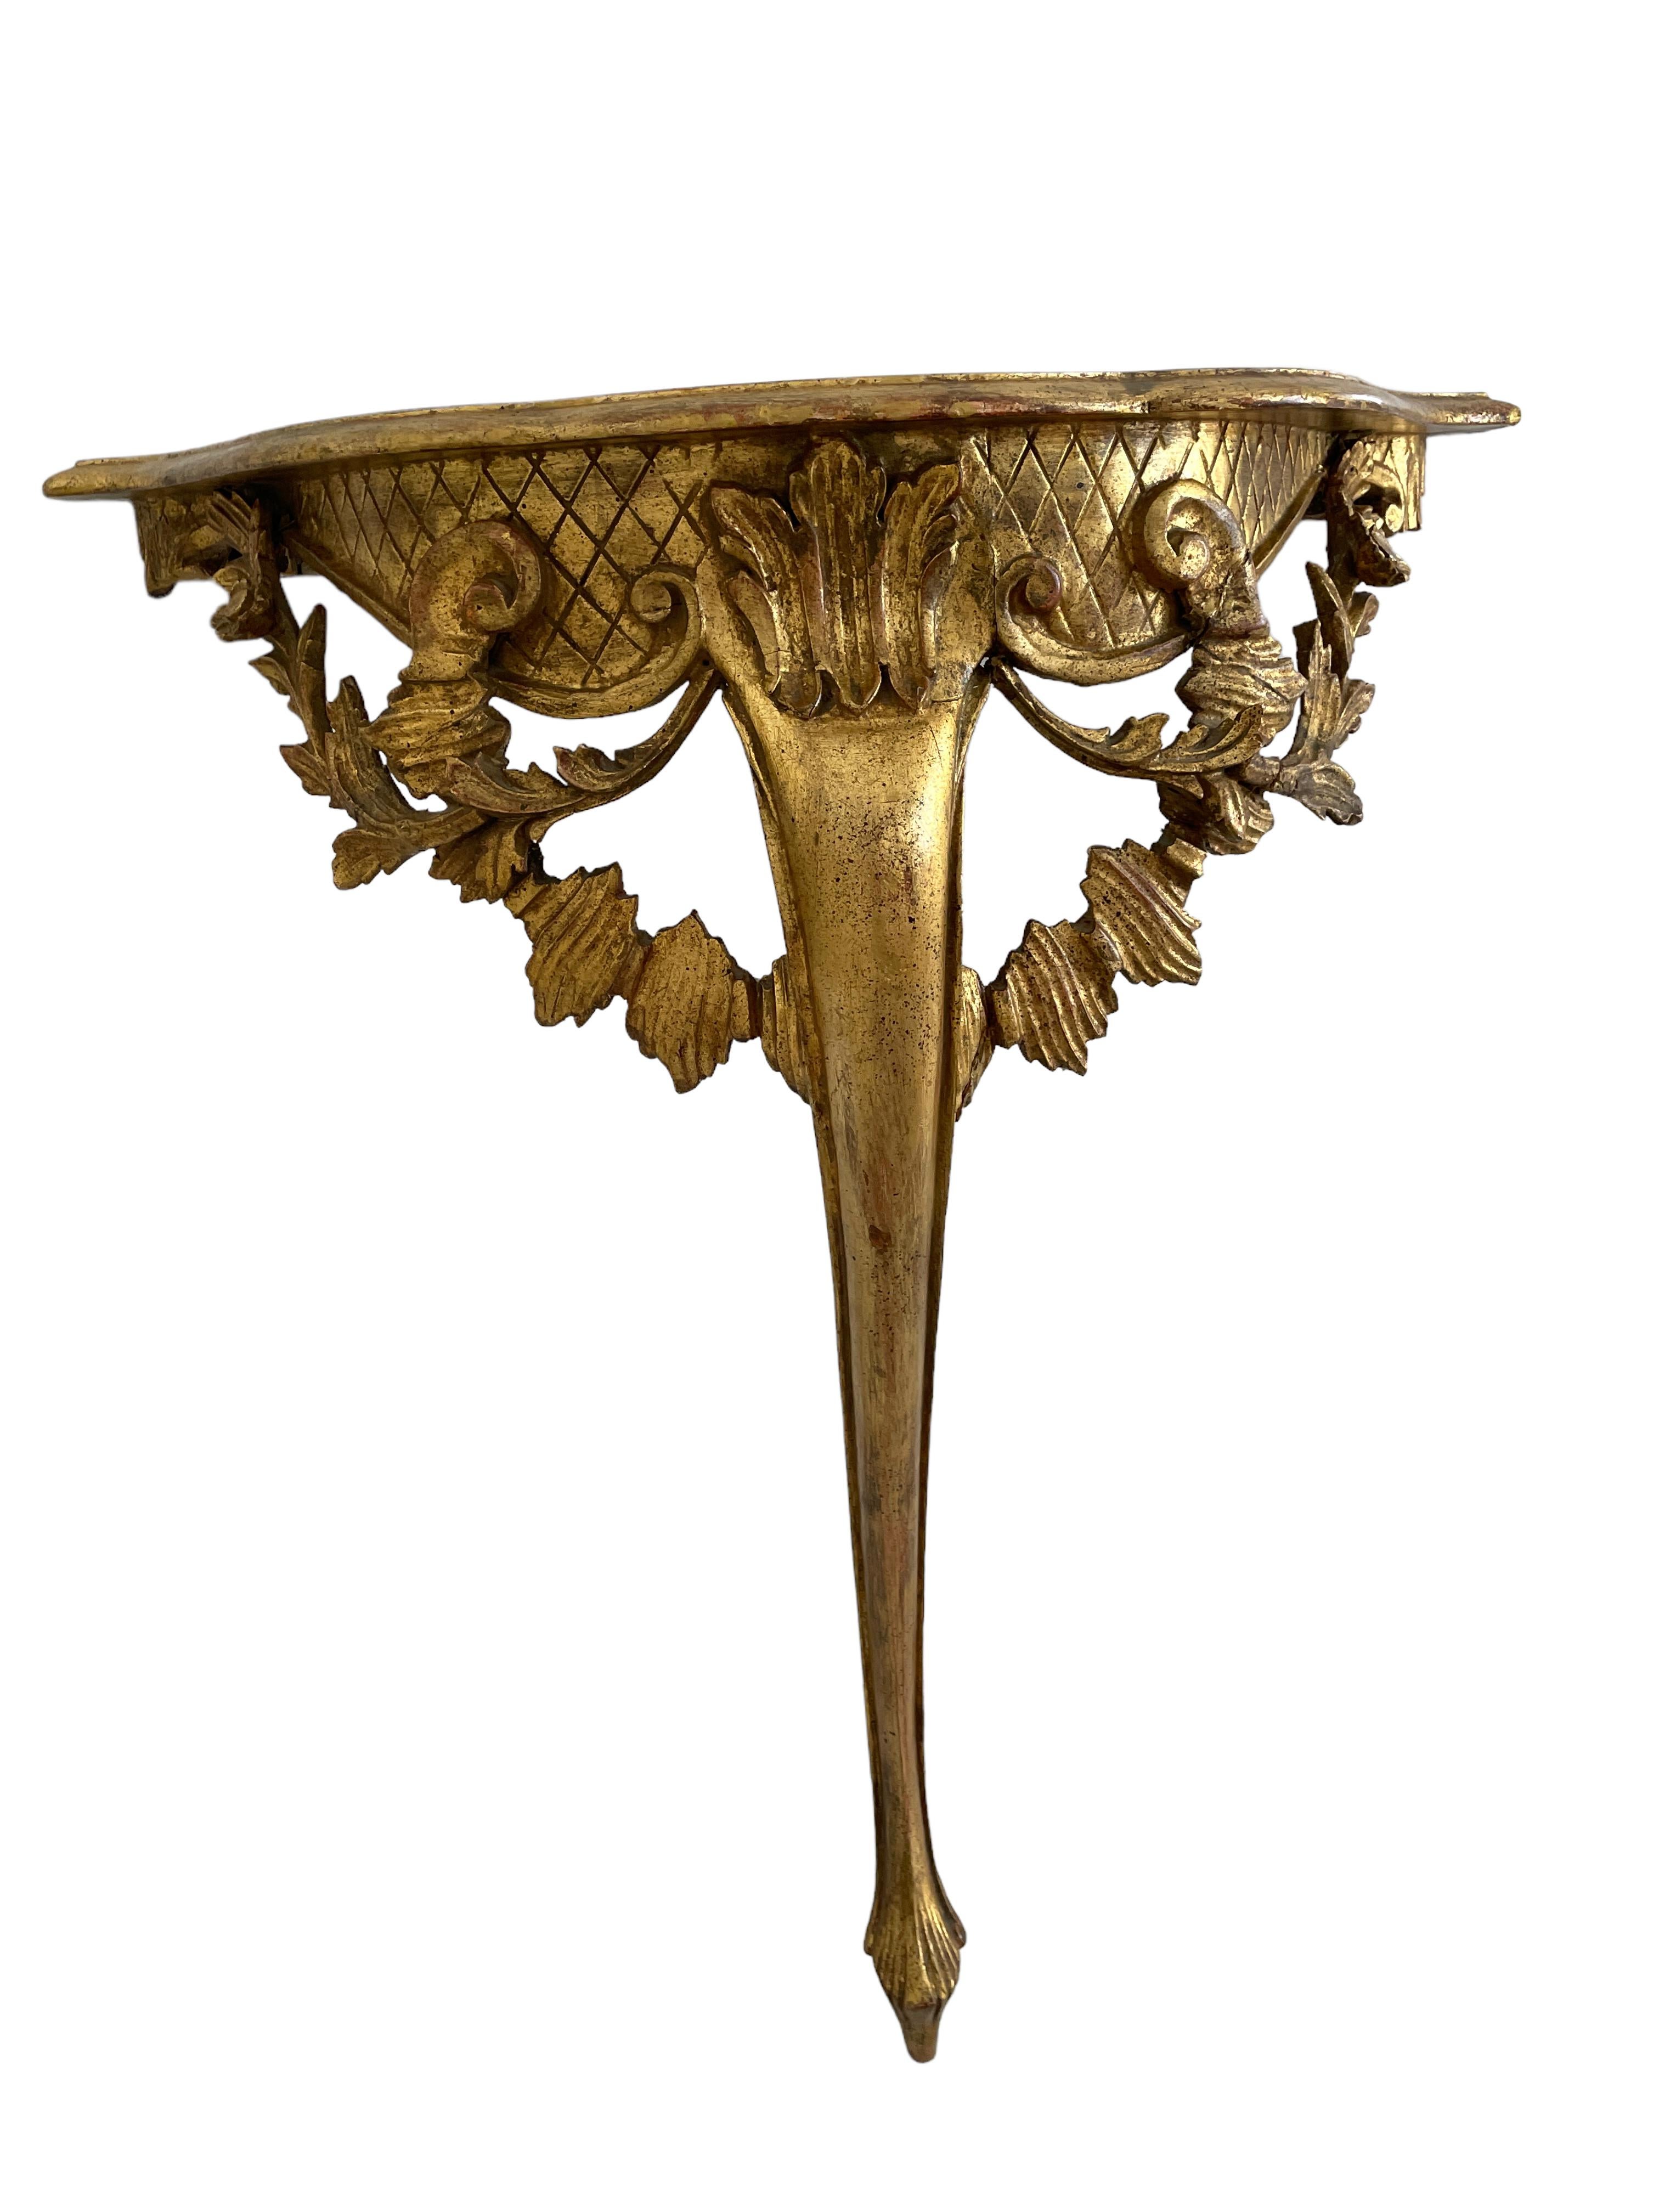 Gilt Vintage Hollywood Regency Tole Toleware Wall Console Table, Gilded Carved Wood